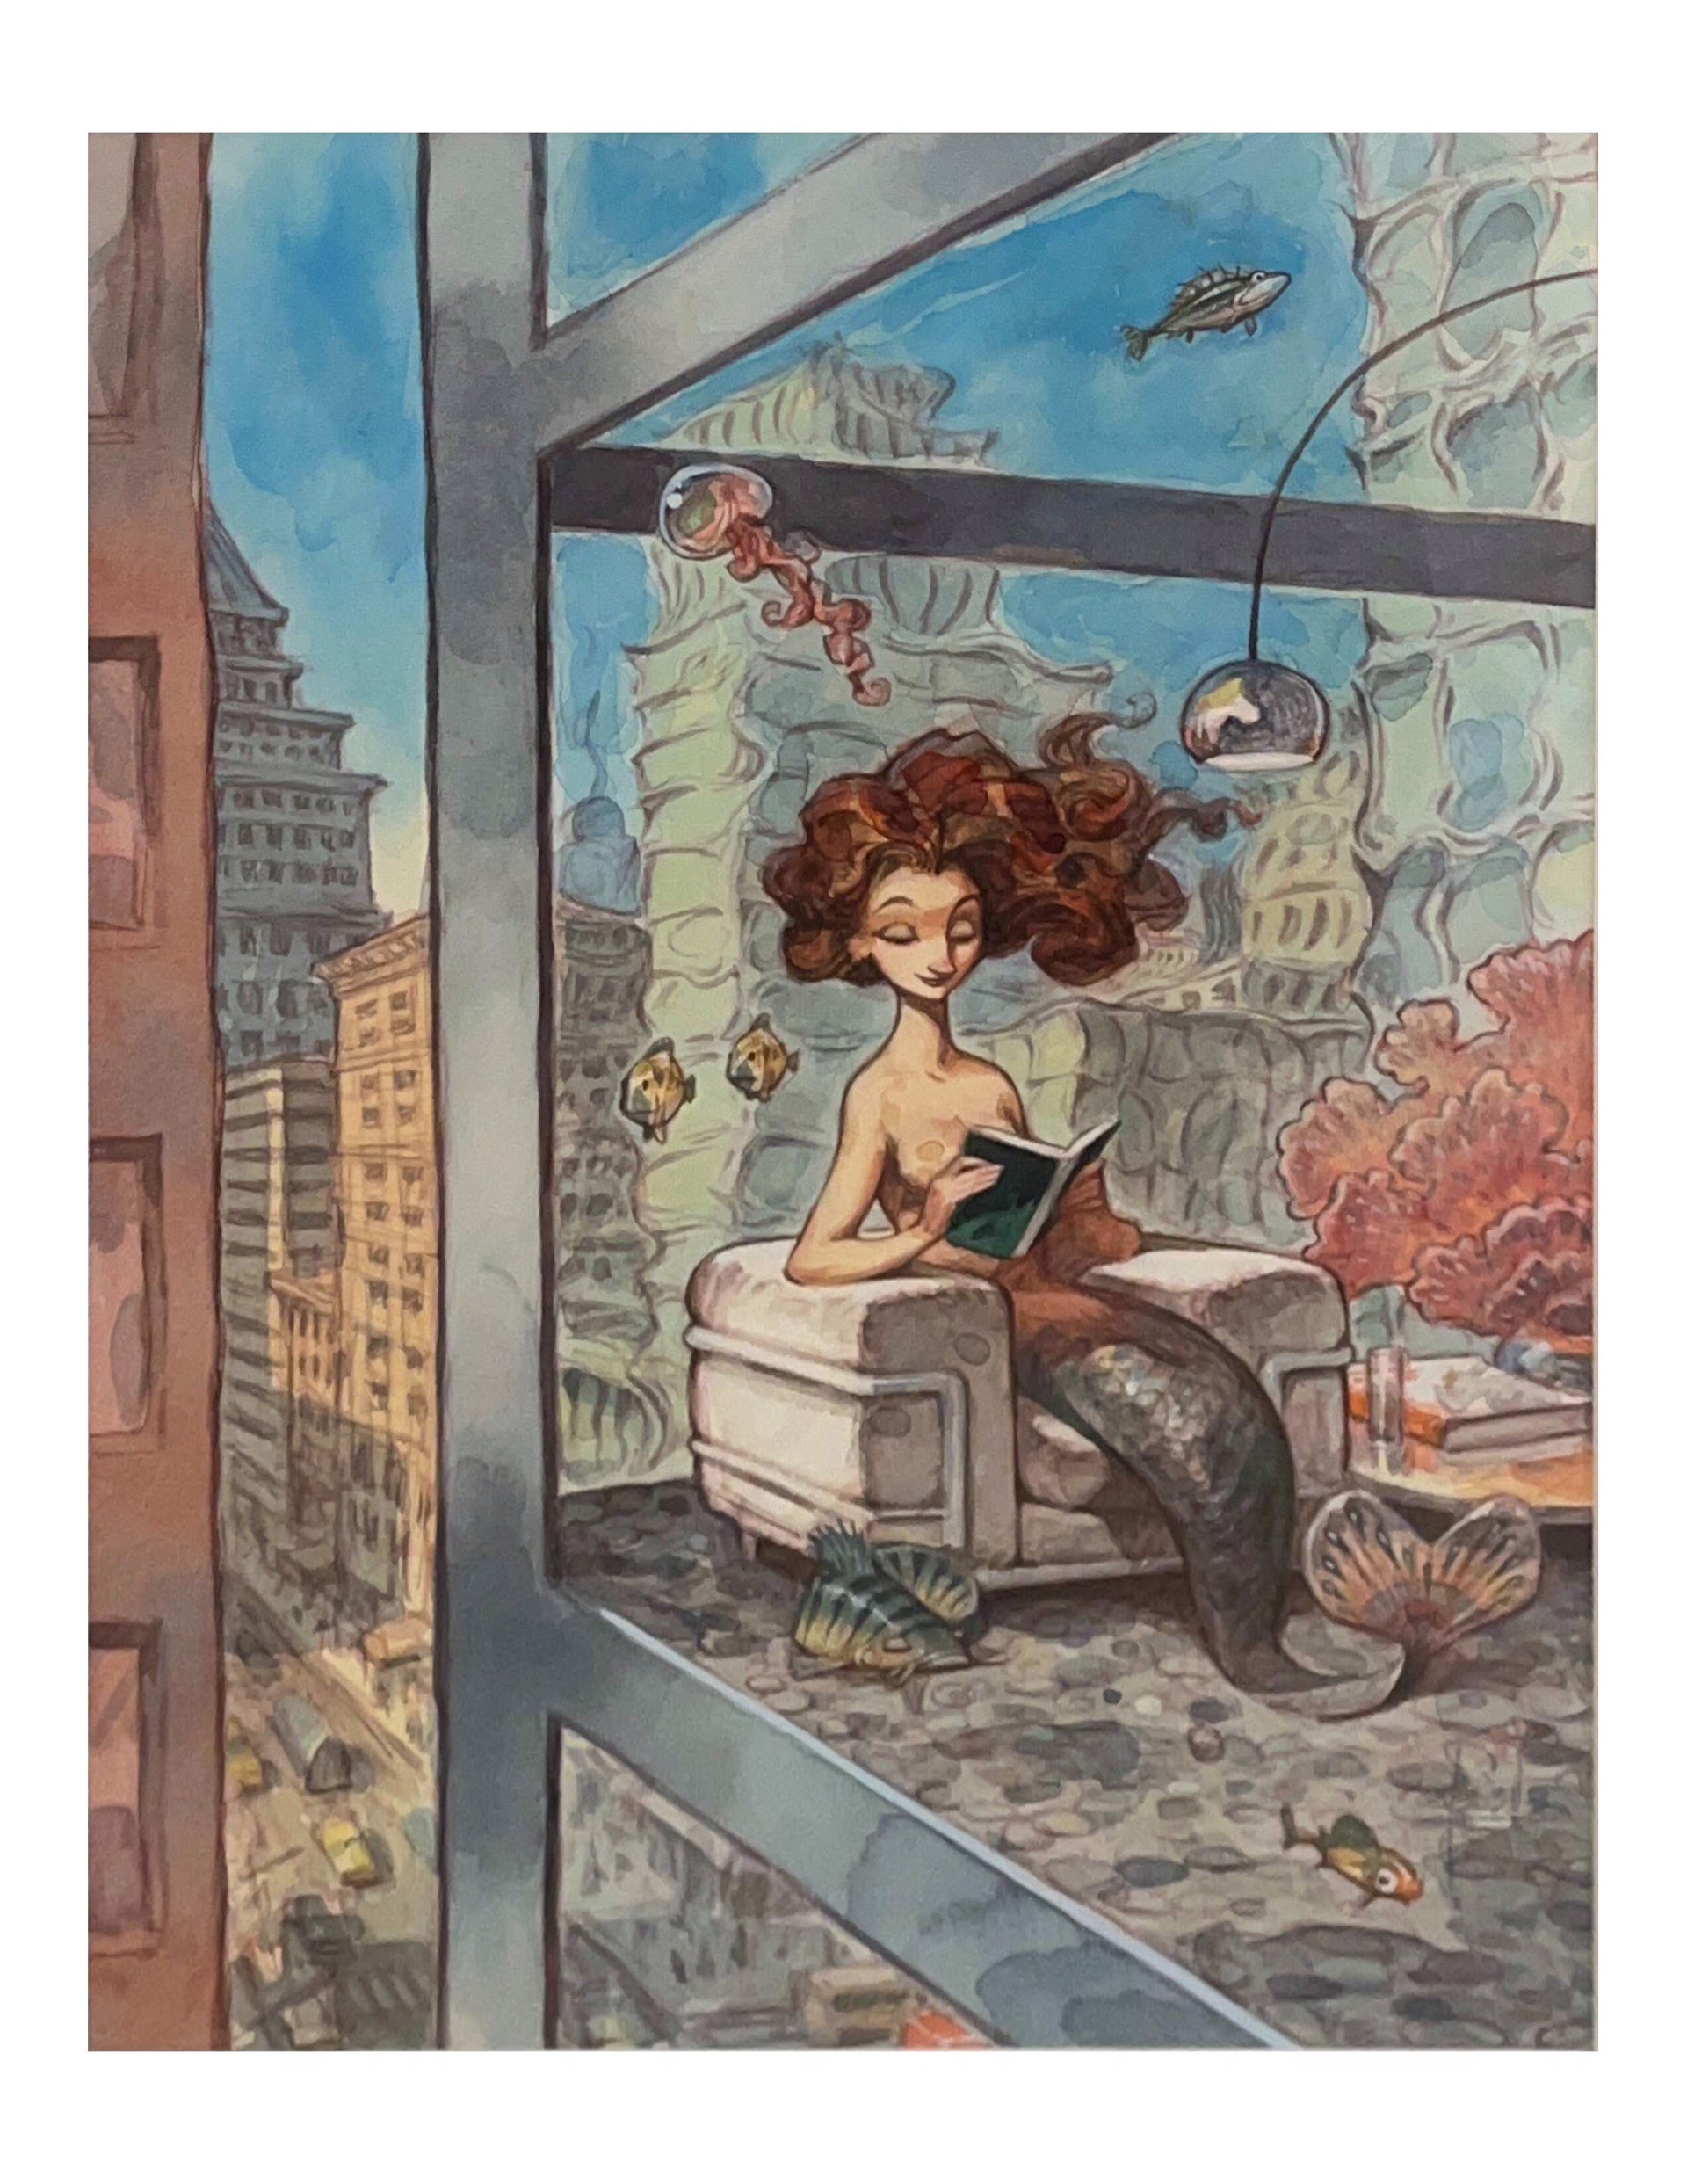 Not published New Yorker Cover "Fishbowl" by Peter de Sève